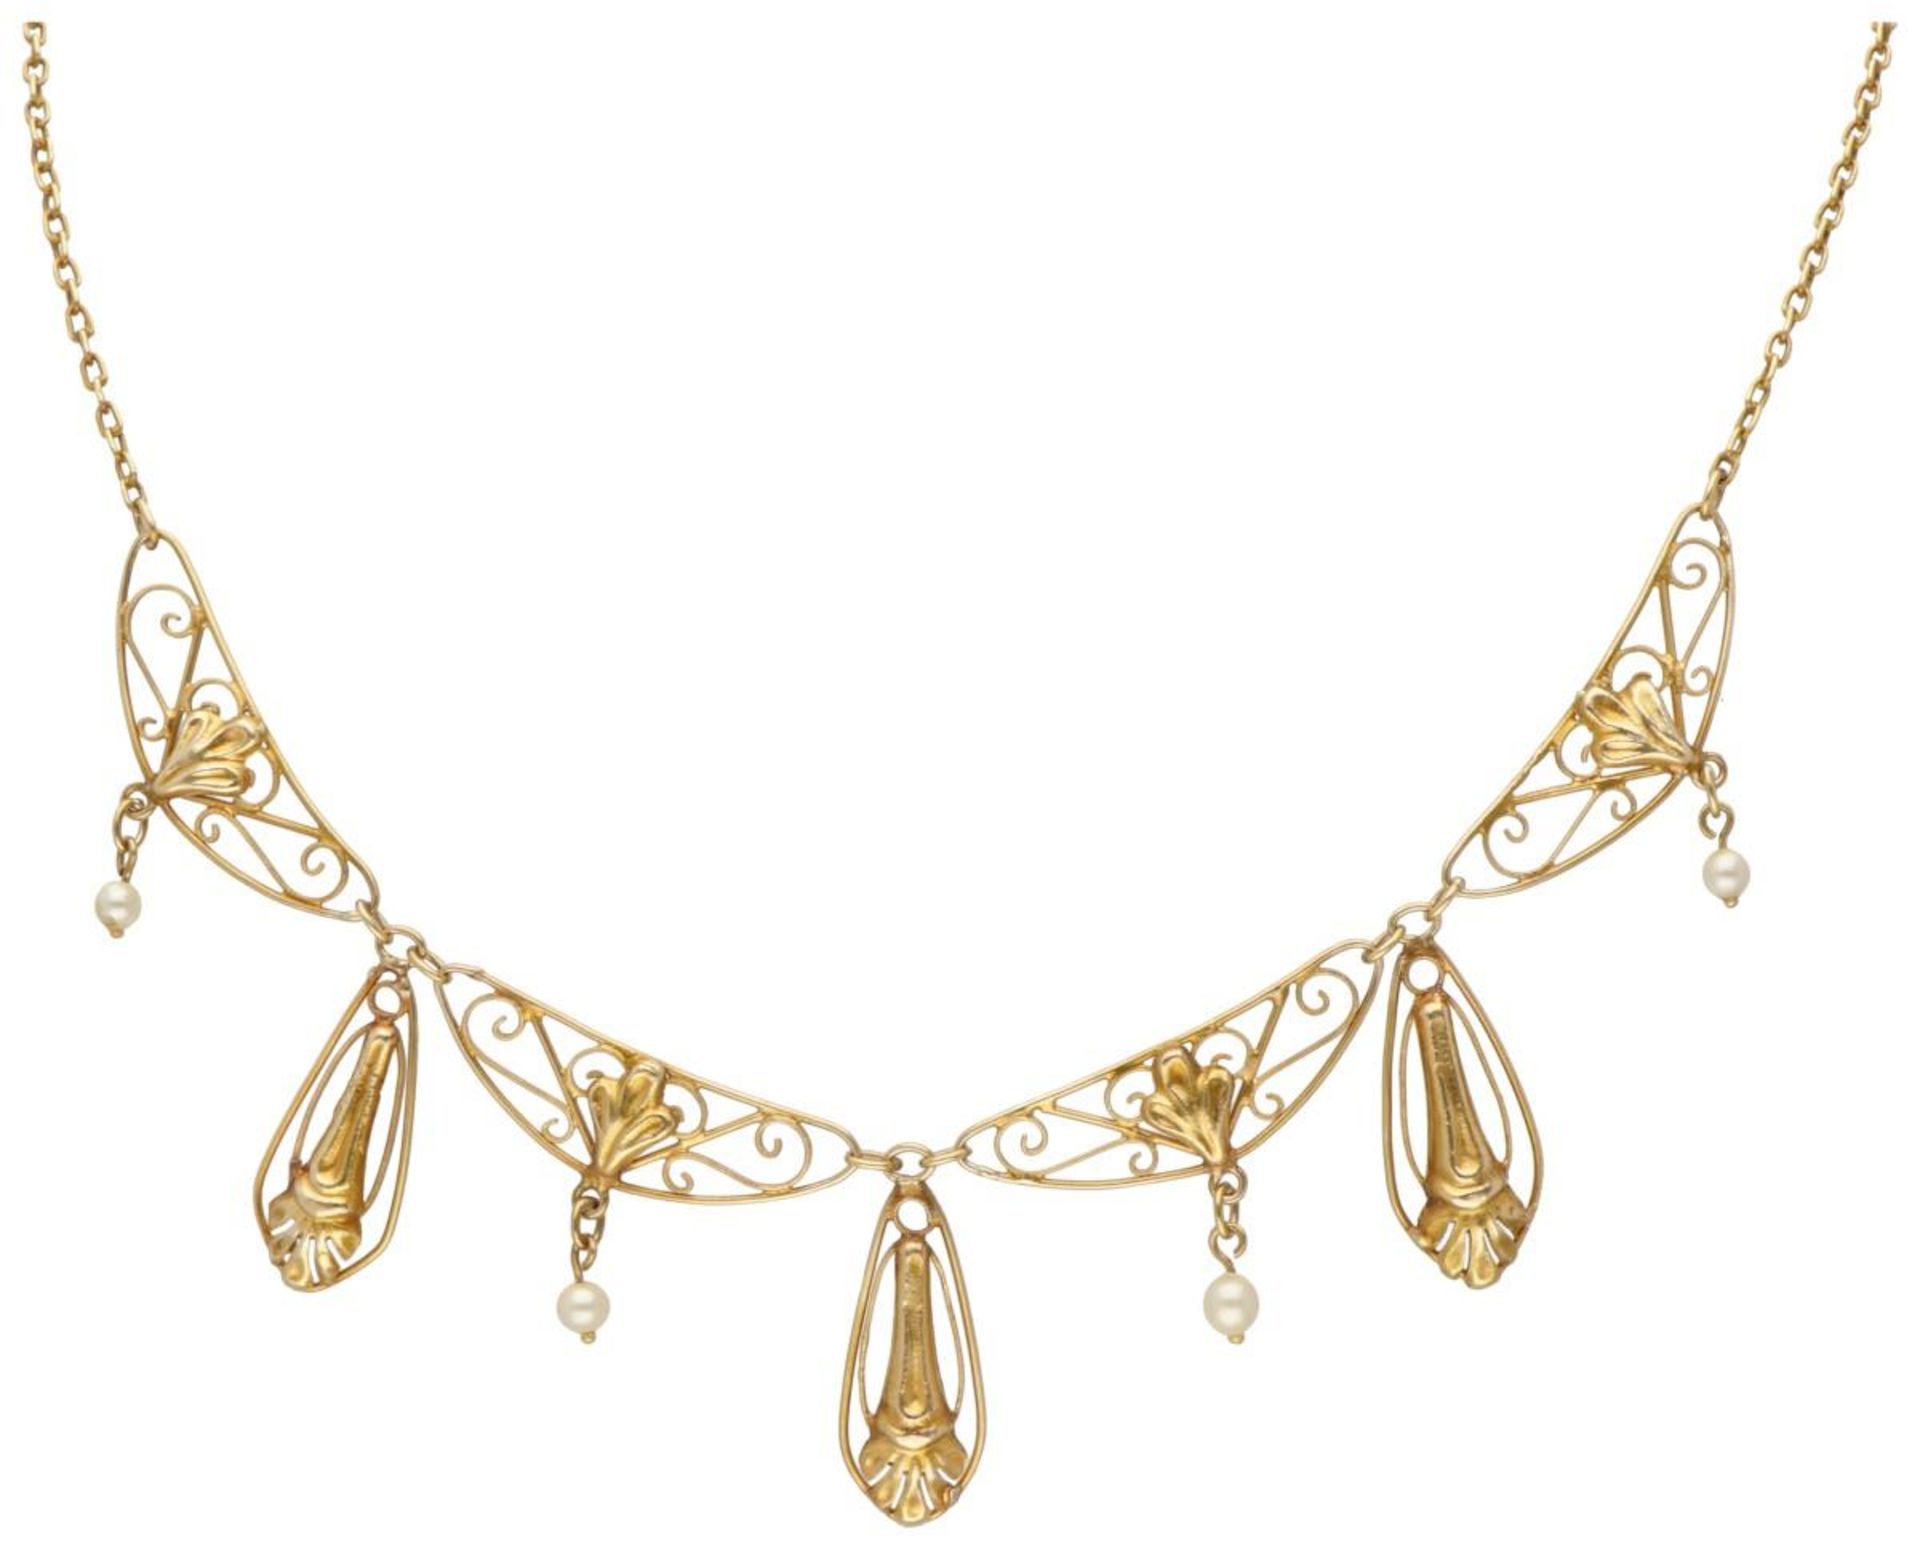 14K. Yellow gold Art Nouveau necklace with white pearls.